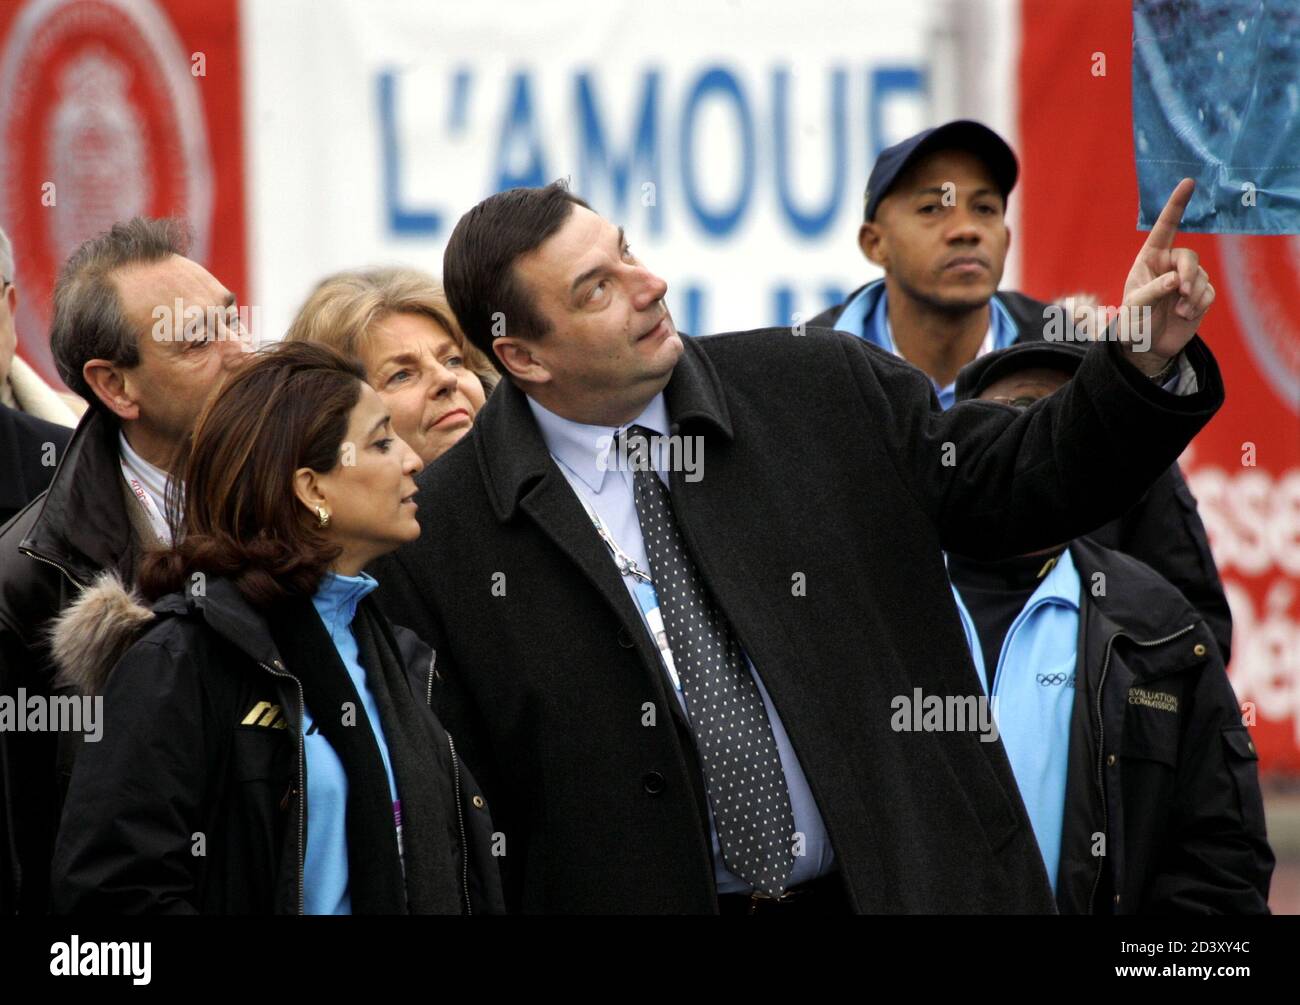 International Olympic Committee Evaluation Commission chairwoman Nawal El Moutawakel of Morocco (L) listens to French Sports Minister Jean-Francois Lamour (R) during a visit to the Batignolles area in Paris, March 10, 2005. The evaluation Committee is on a four-day visit to examine Paris' bid for the 2012 Games. Stock Photo